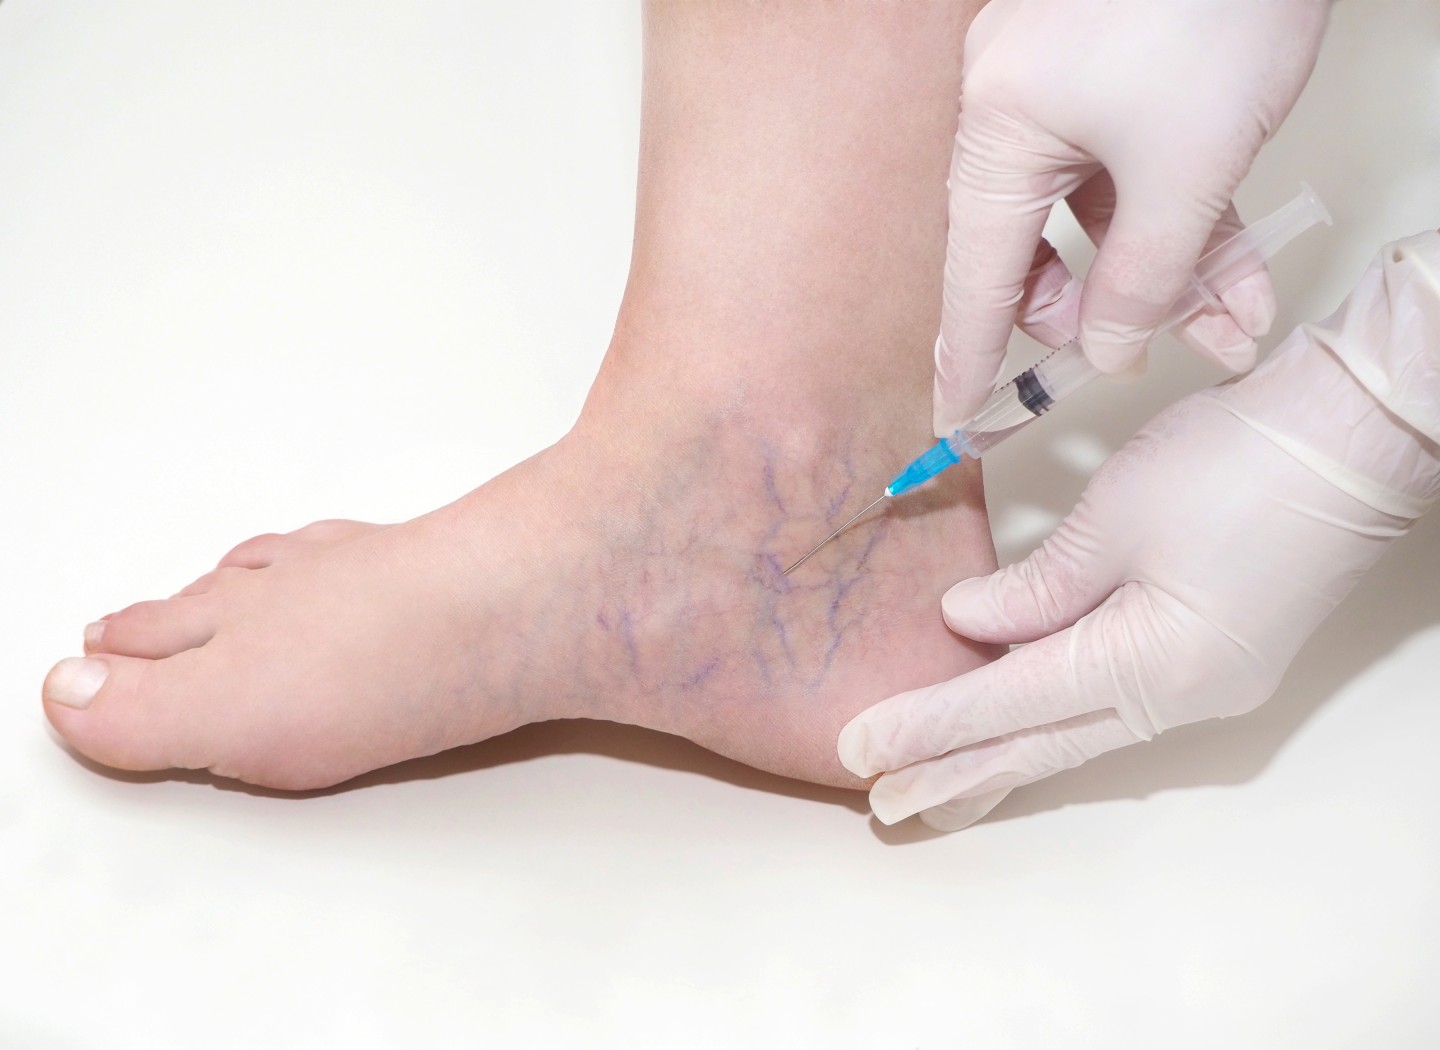 Does Sclerotherapy Remove Leg Veins Permanently